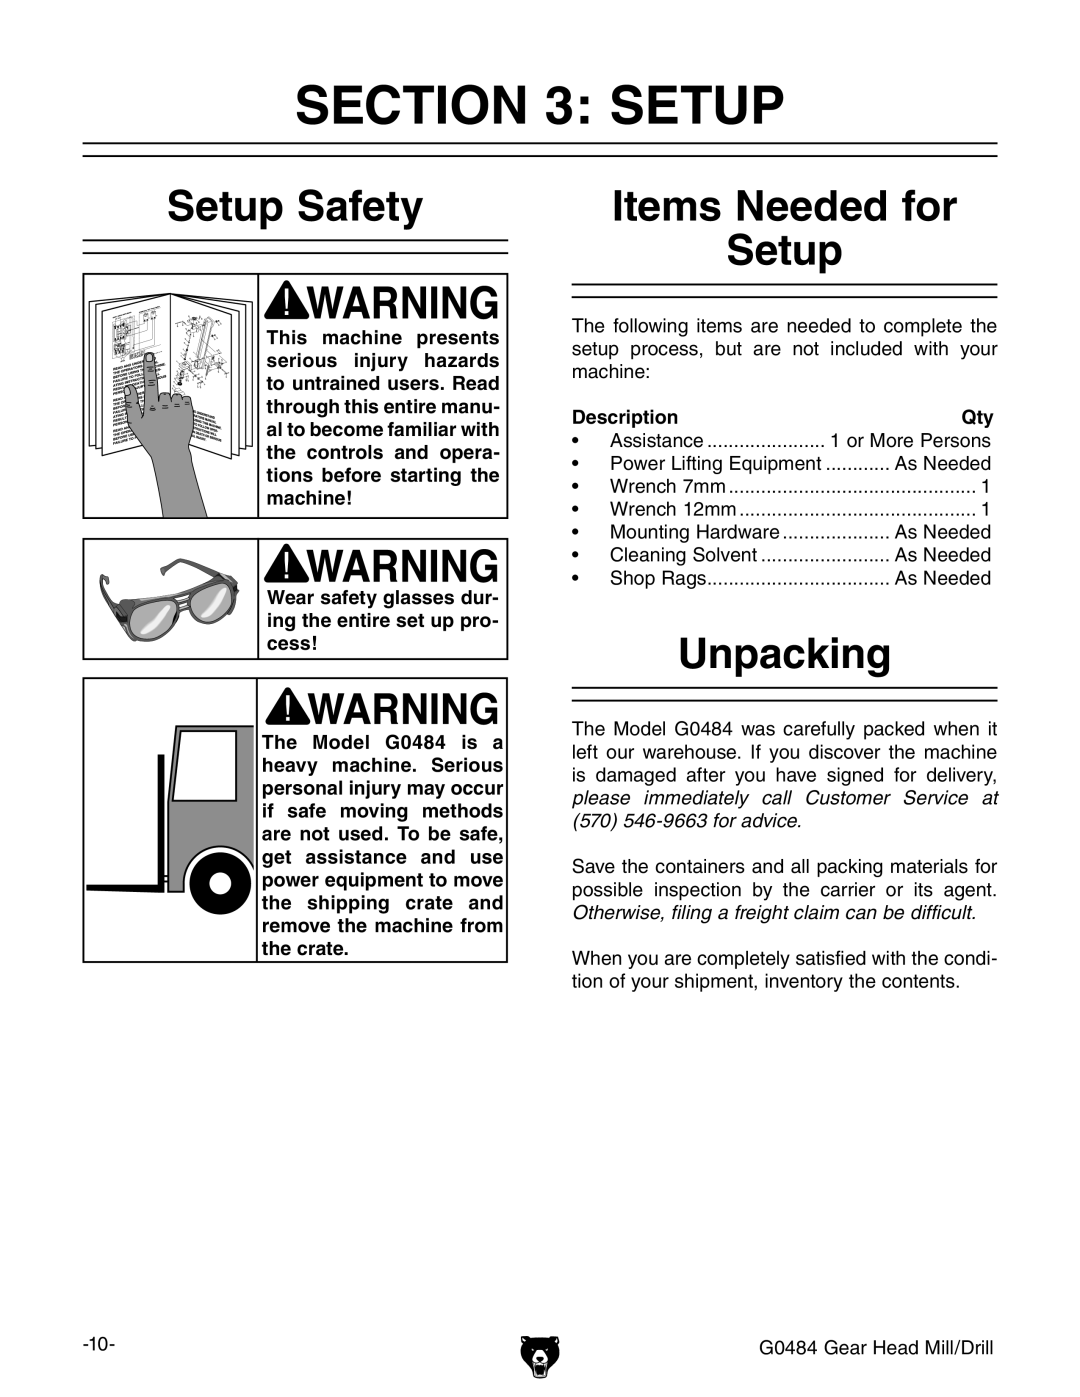 Grizzly G0484 owner manual Setup Safety, Items Needed for Setup, Unpacking 